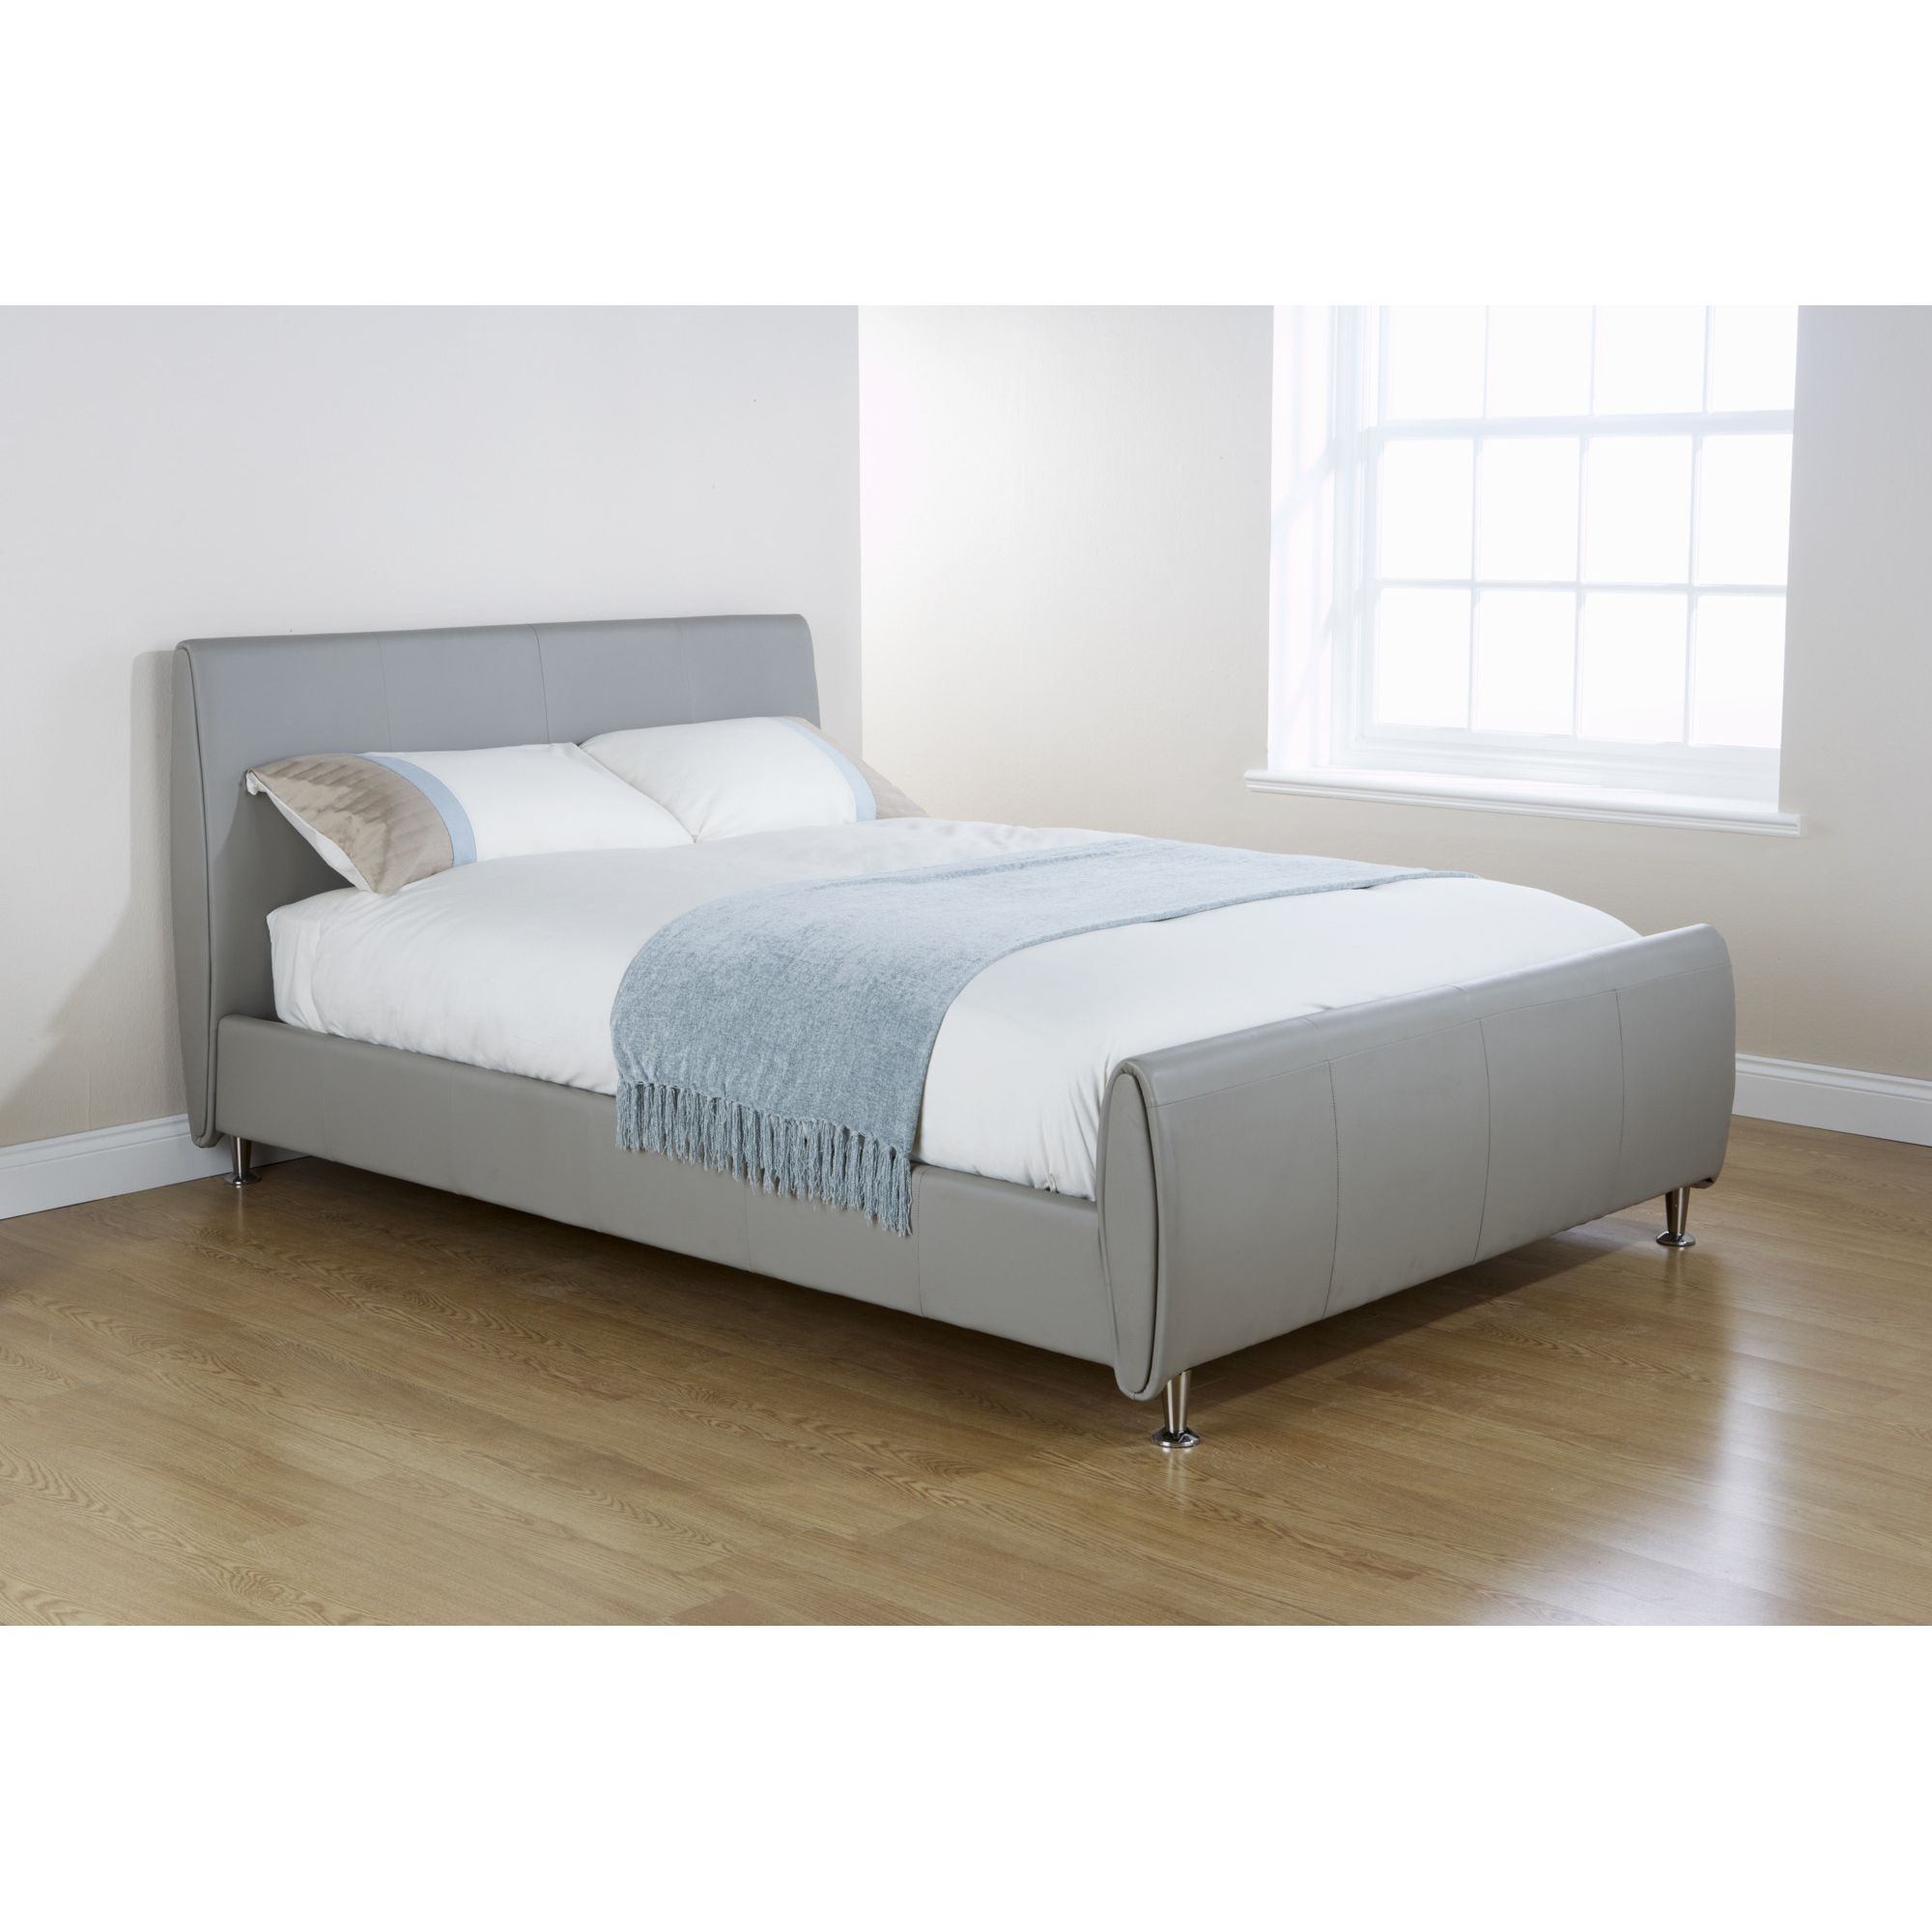 Elements Milano Double Bed at Tesco Direct